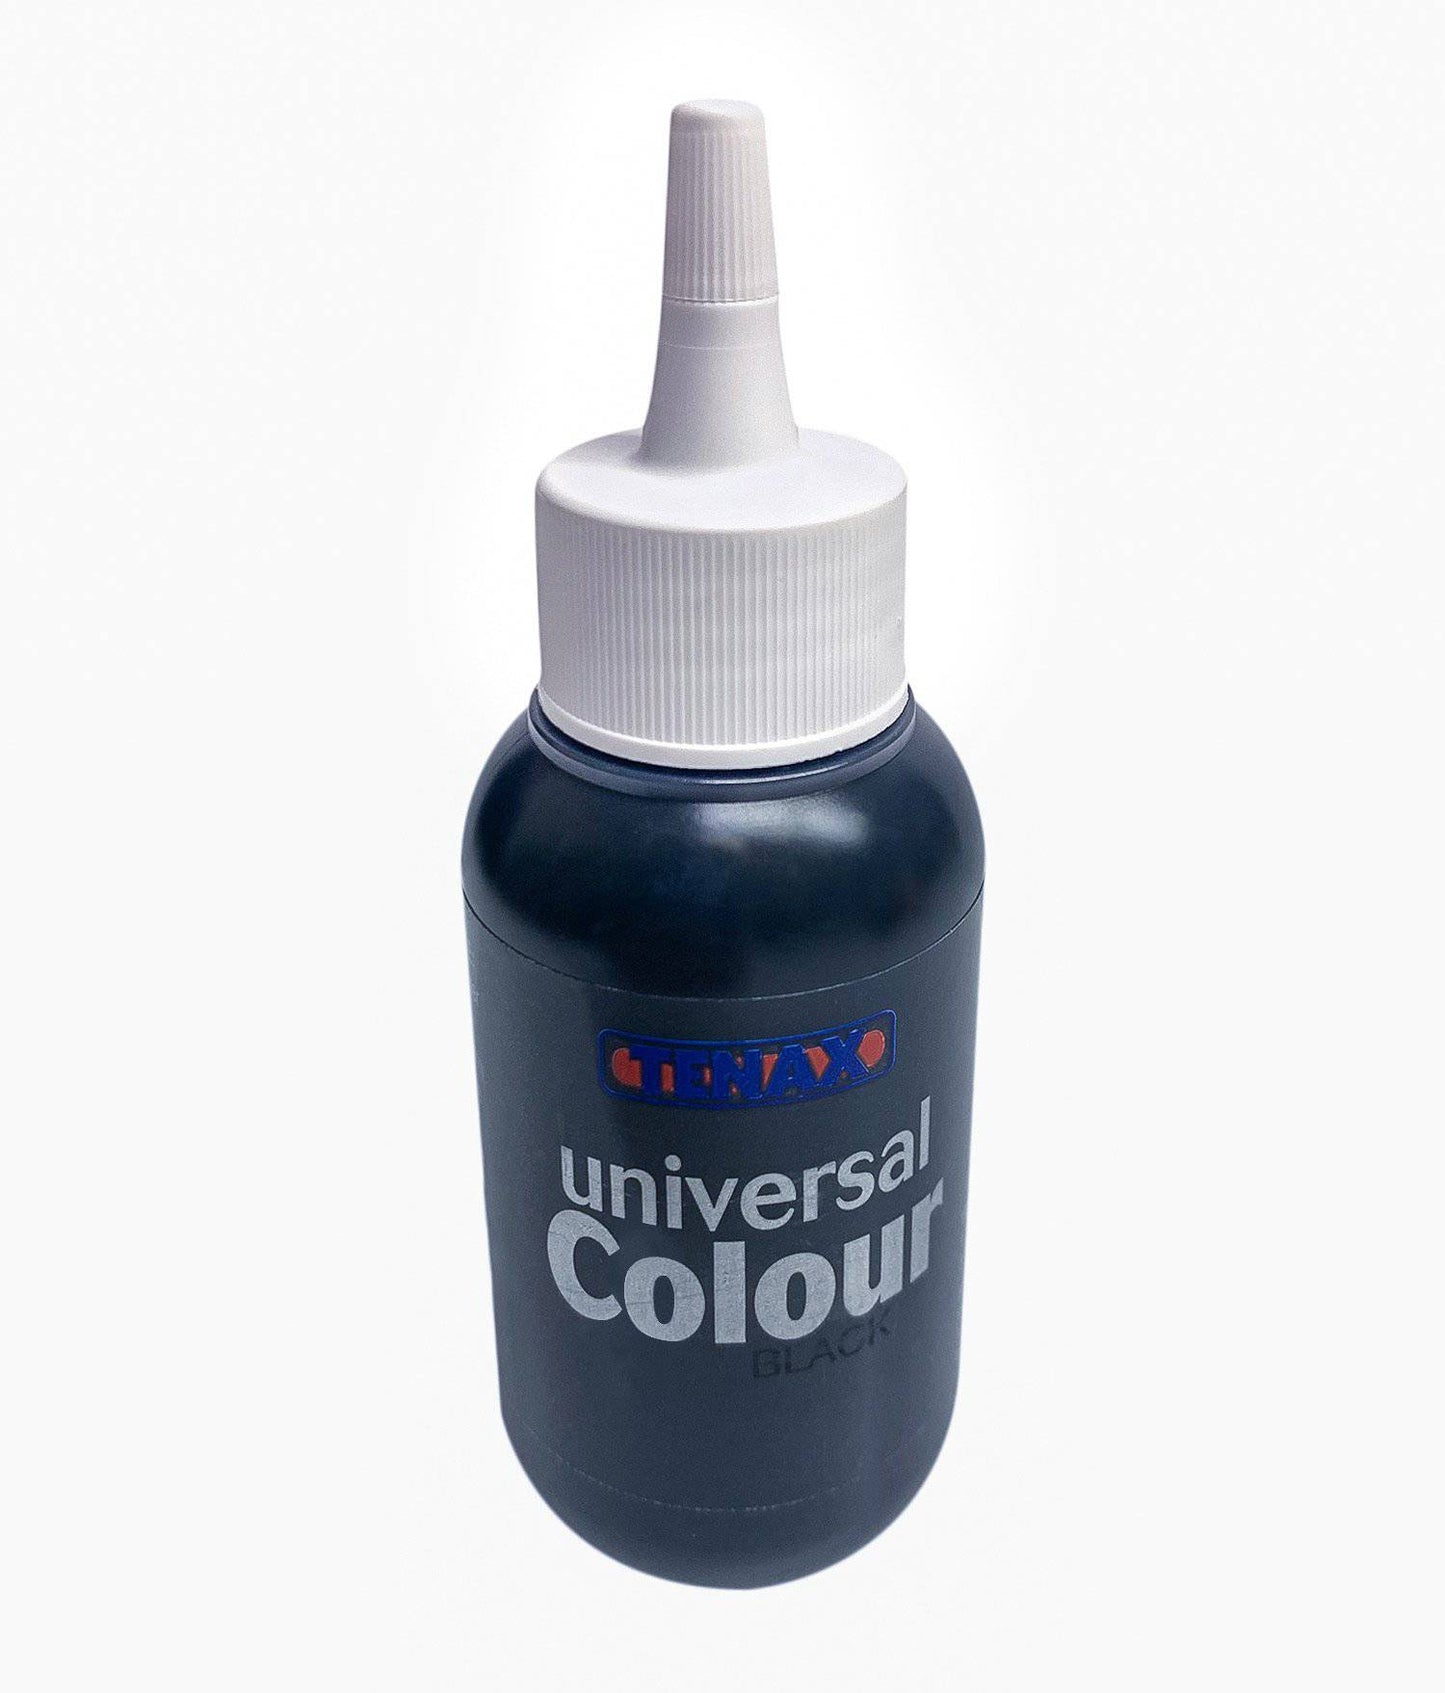 Tenax Universal Colours - 75ml - Stone Doctor Australia - Stone Care Products > Chemicals > Colour Paste